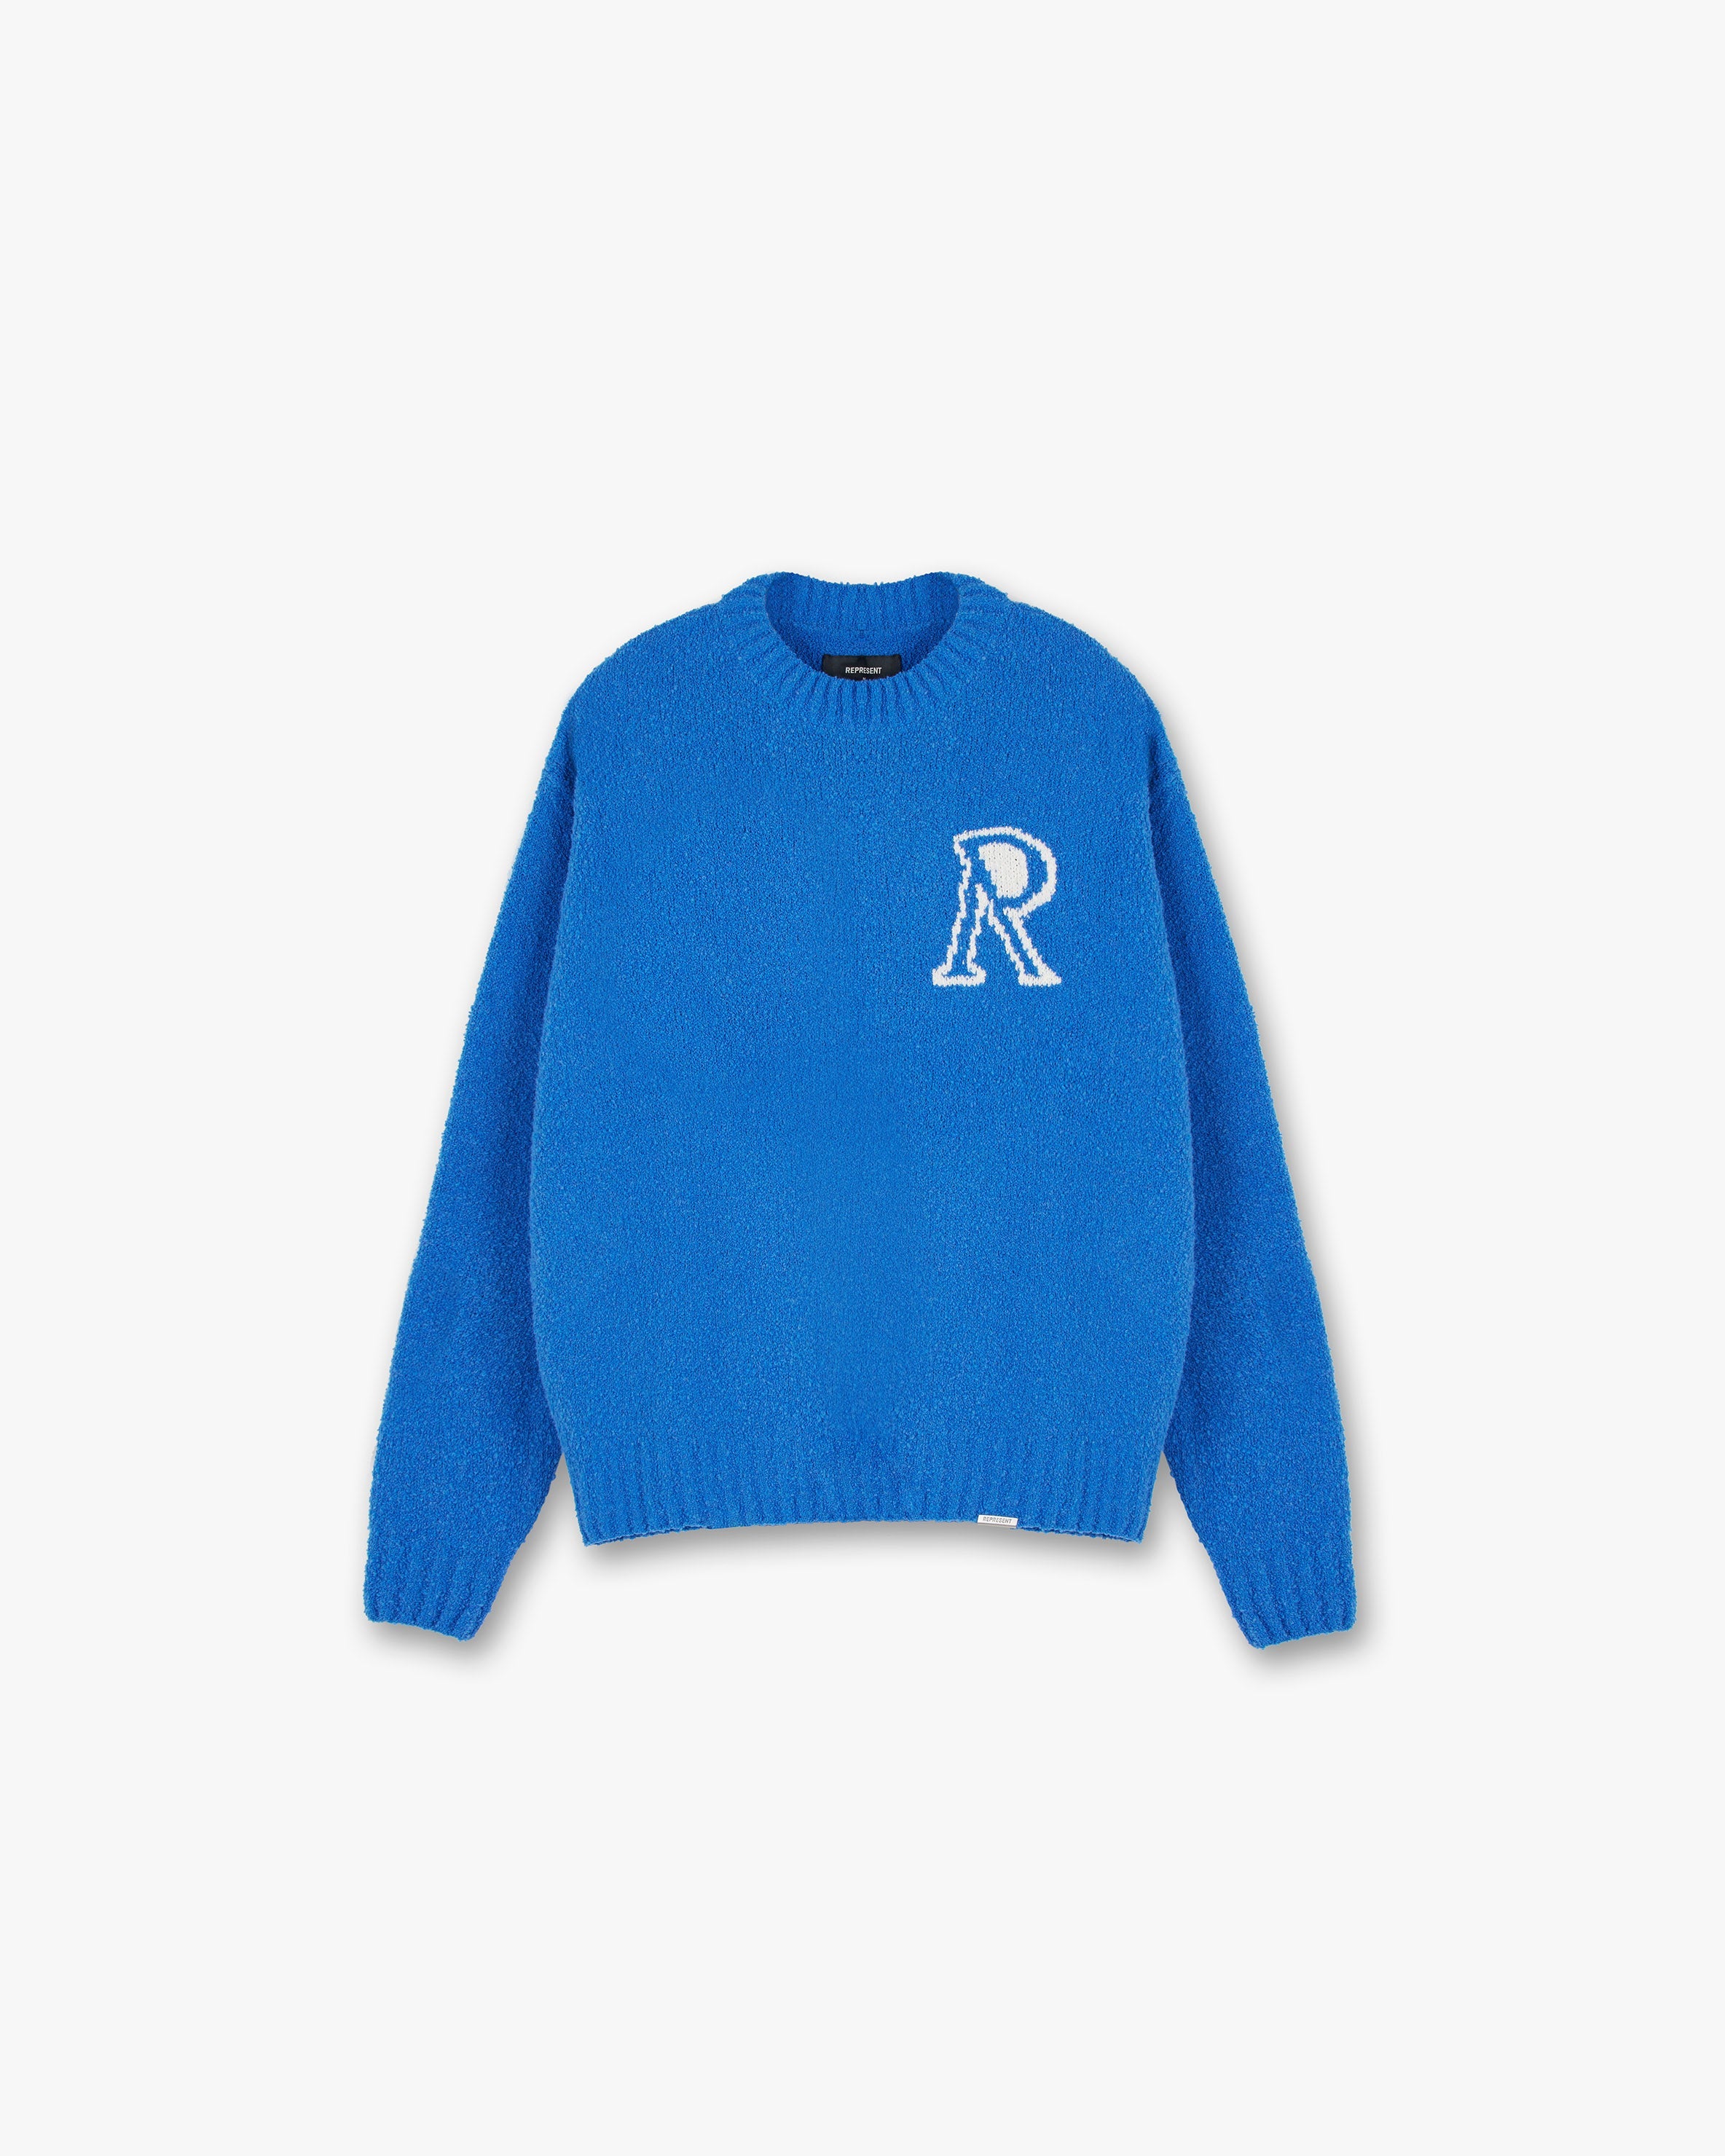 Initial Boucle Sweater | Cobalt Knitwear FW22 | Represent Clo